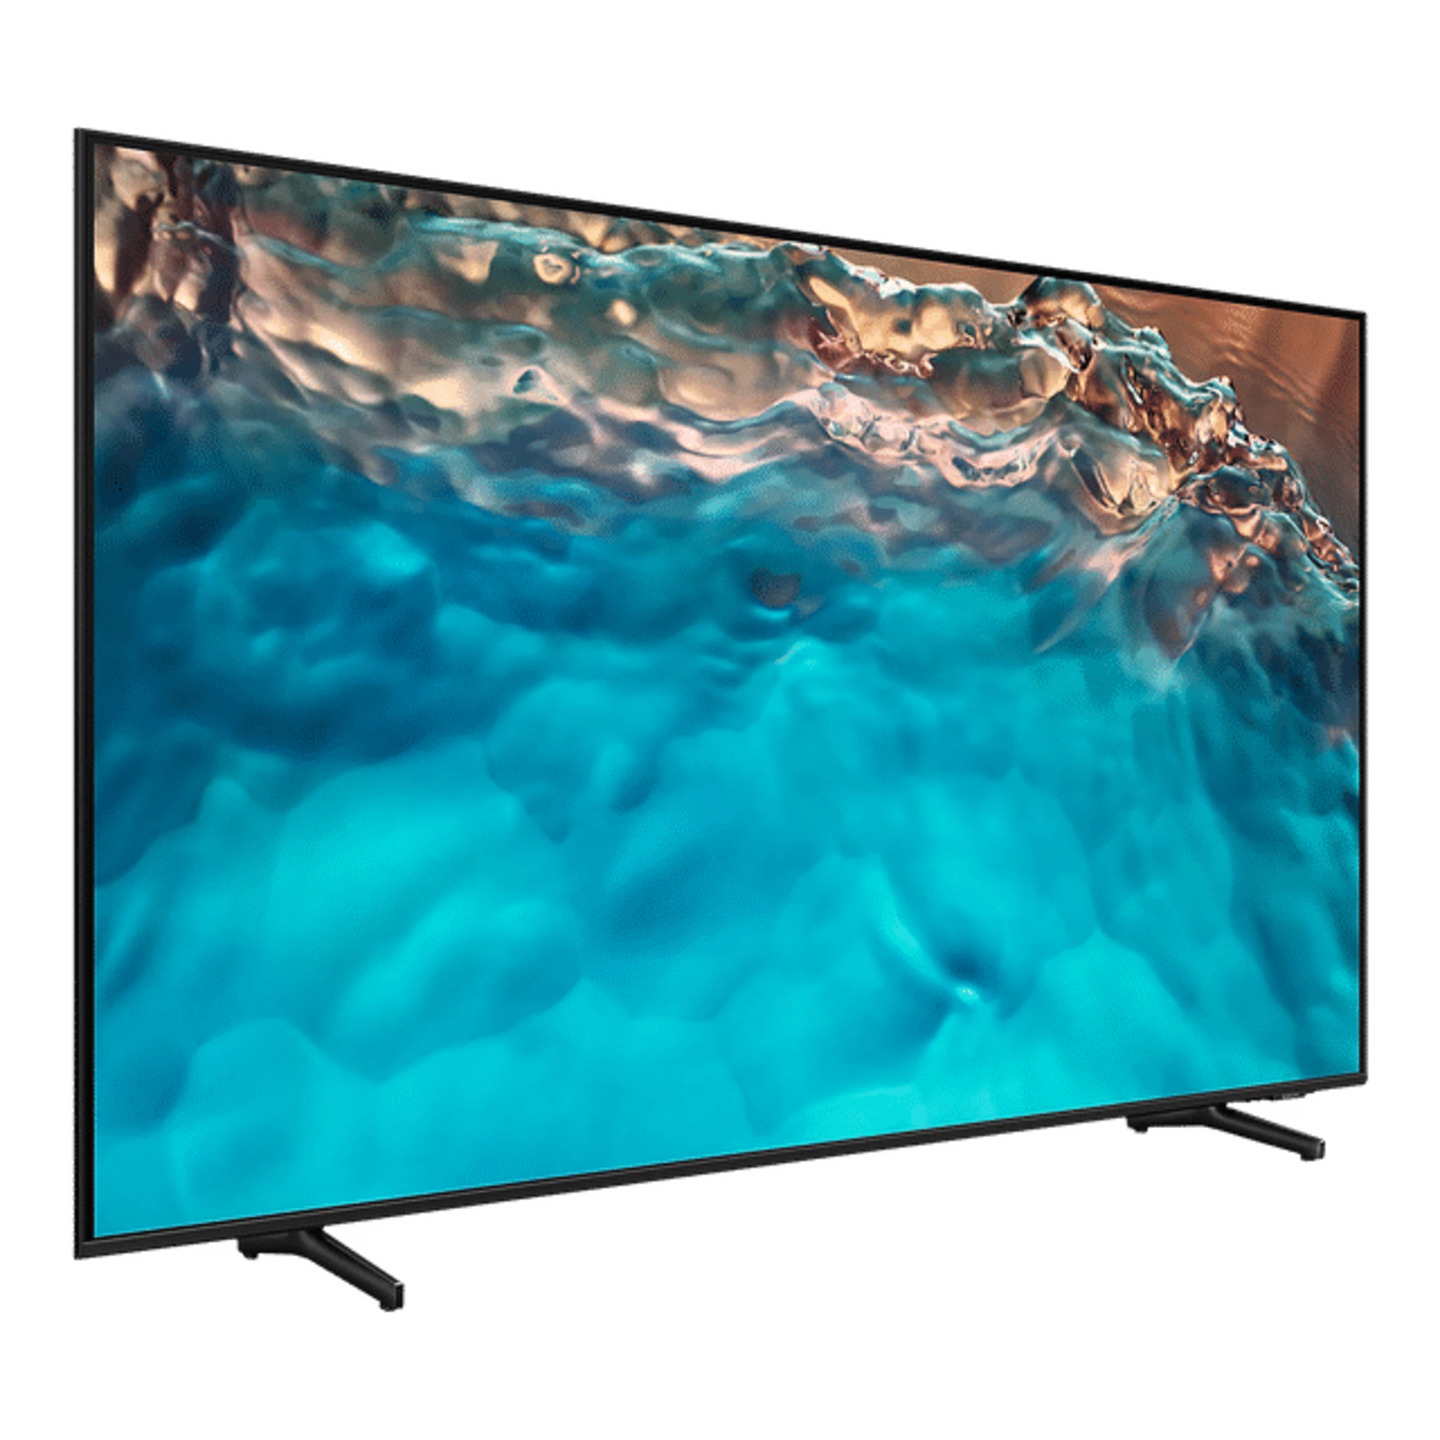 SAMSUNG Series 8 163 cm (65 inch) 4K Ultra HD LED Tizen TV with Alexa Compatibility